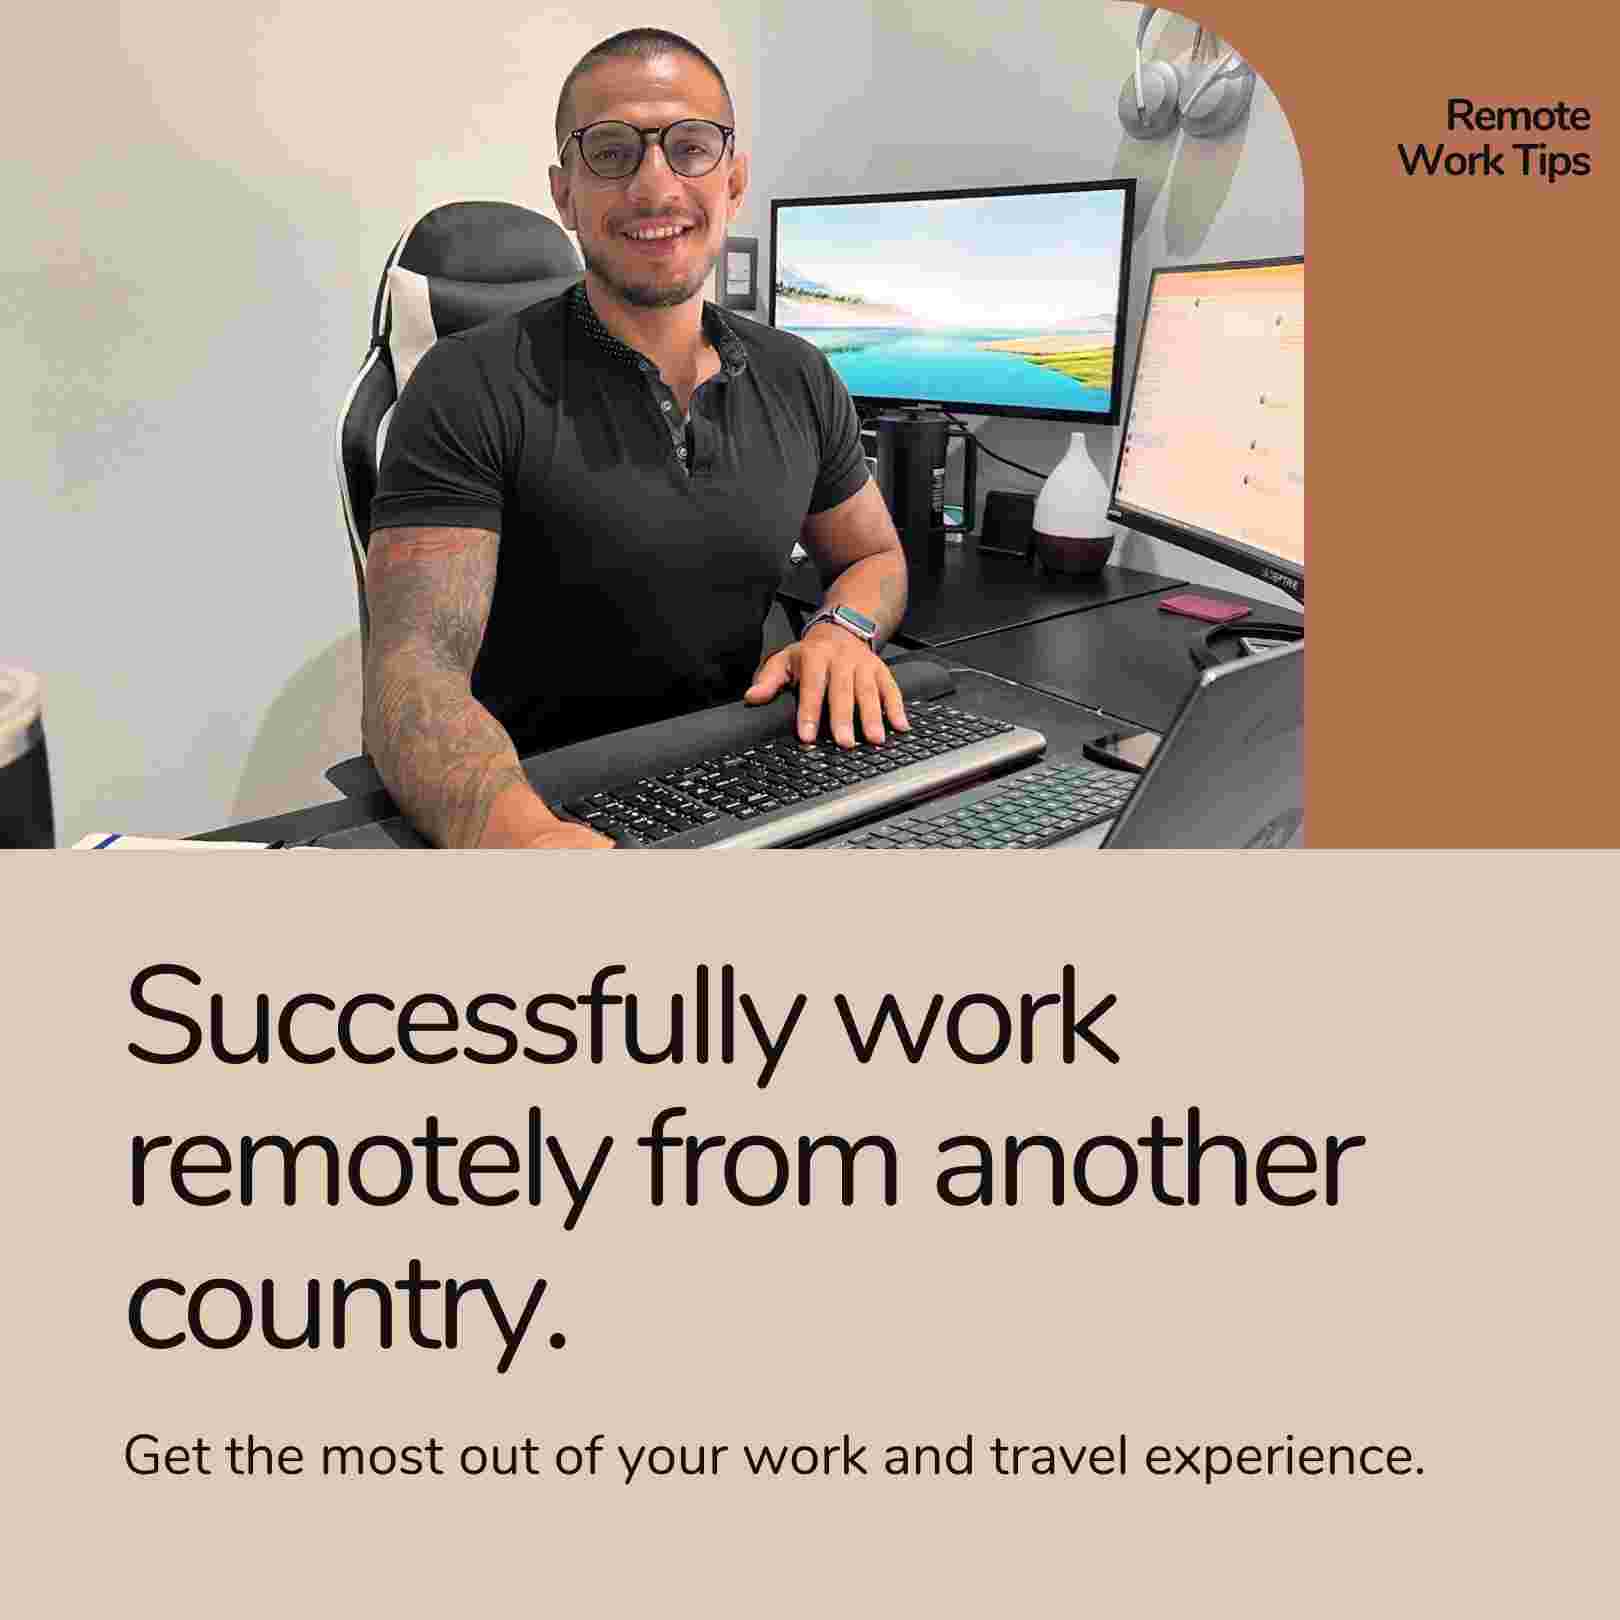 How To Work Remotely From Another Country